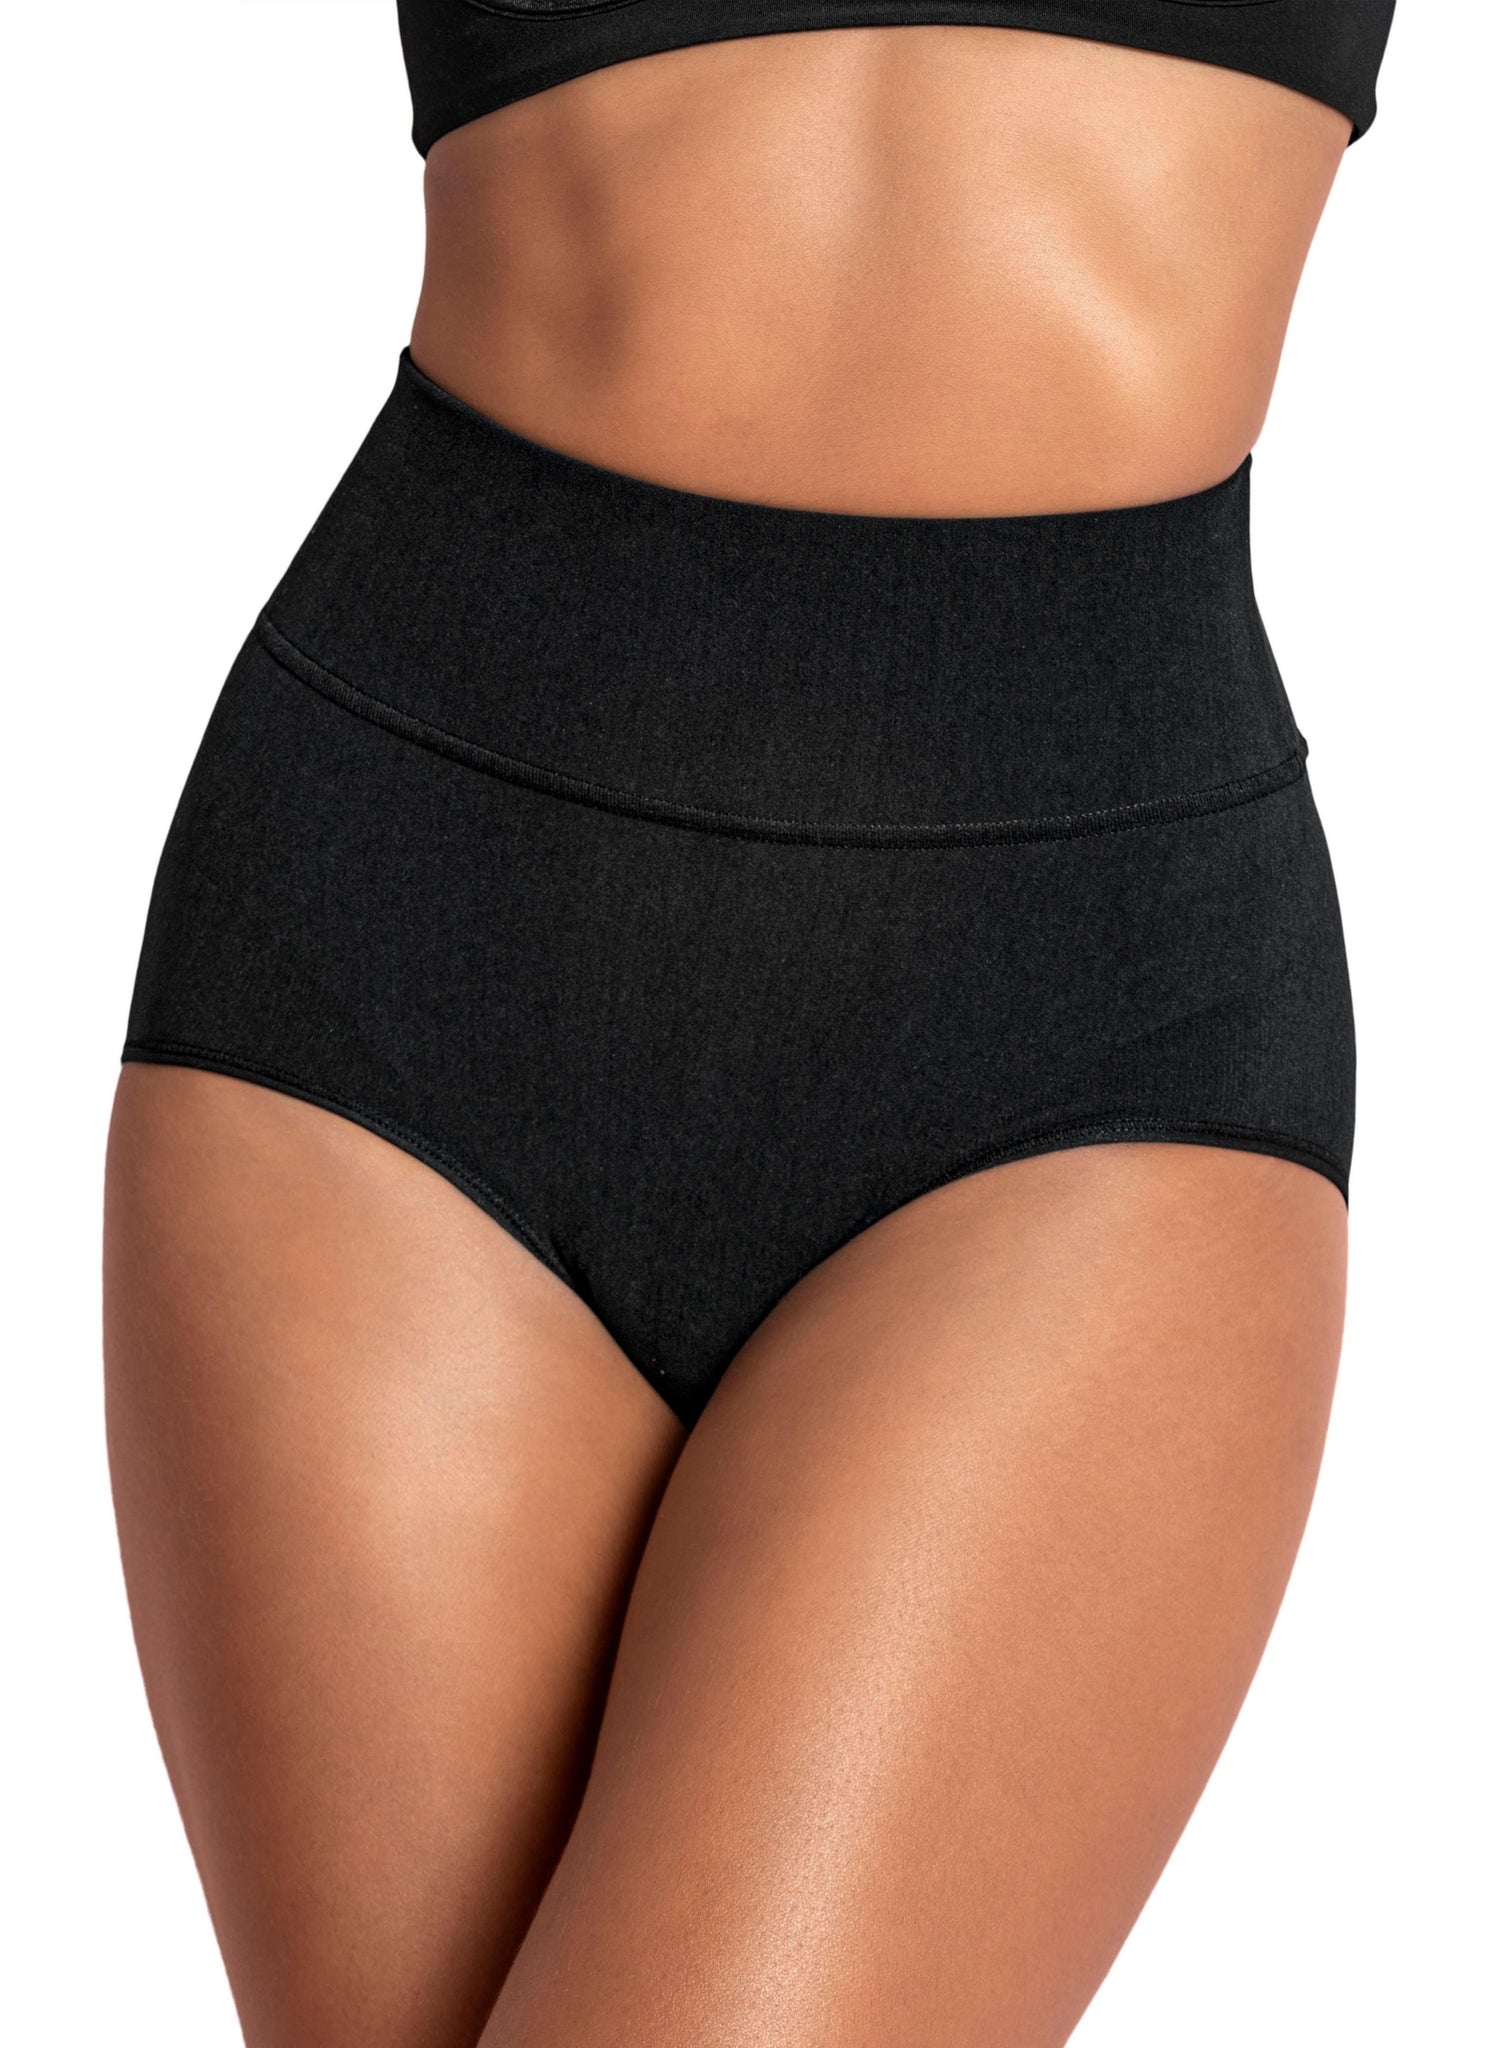 High-Waisted Classic Smoothing Brief - Black